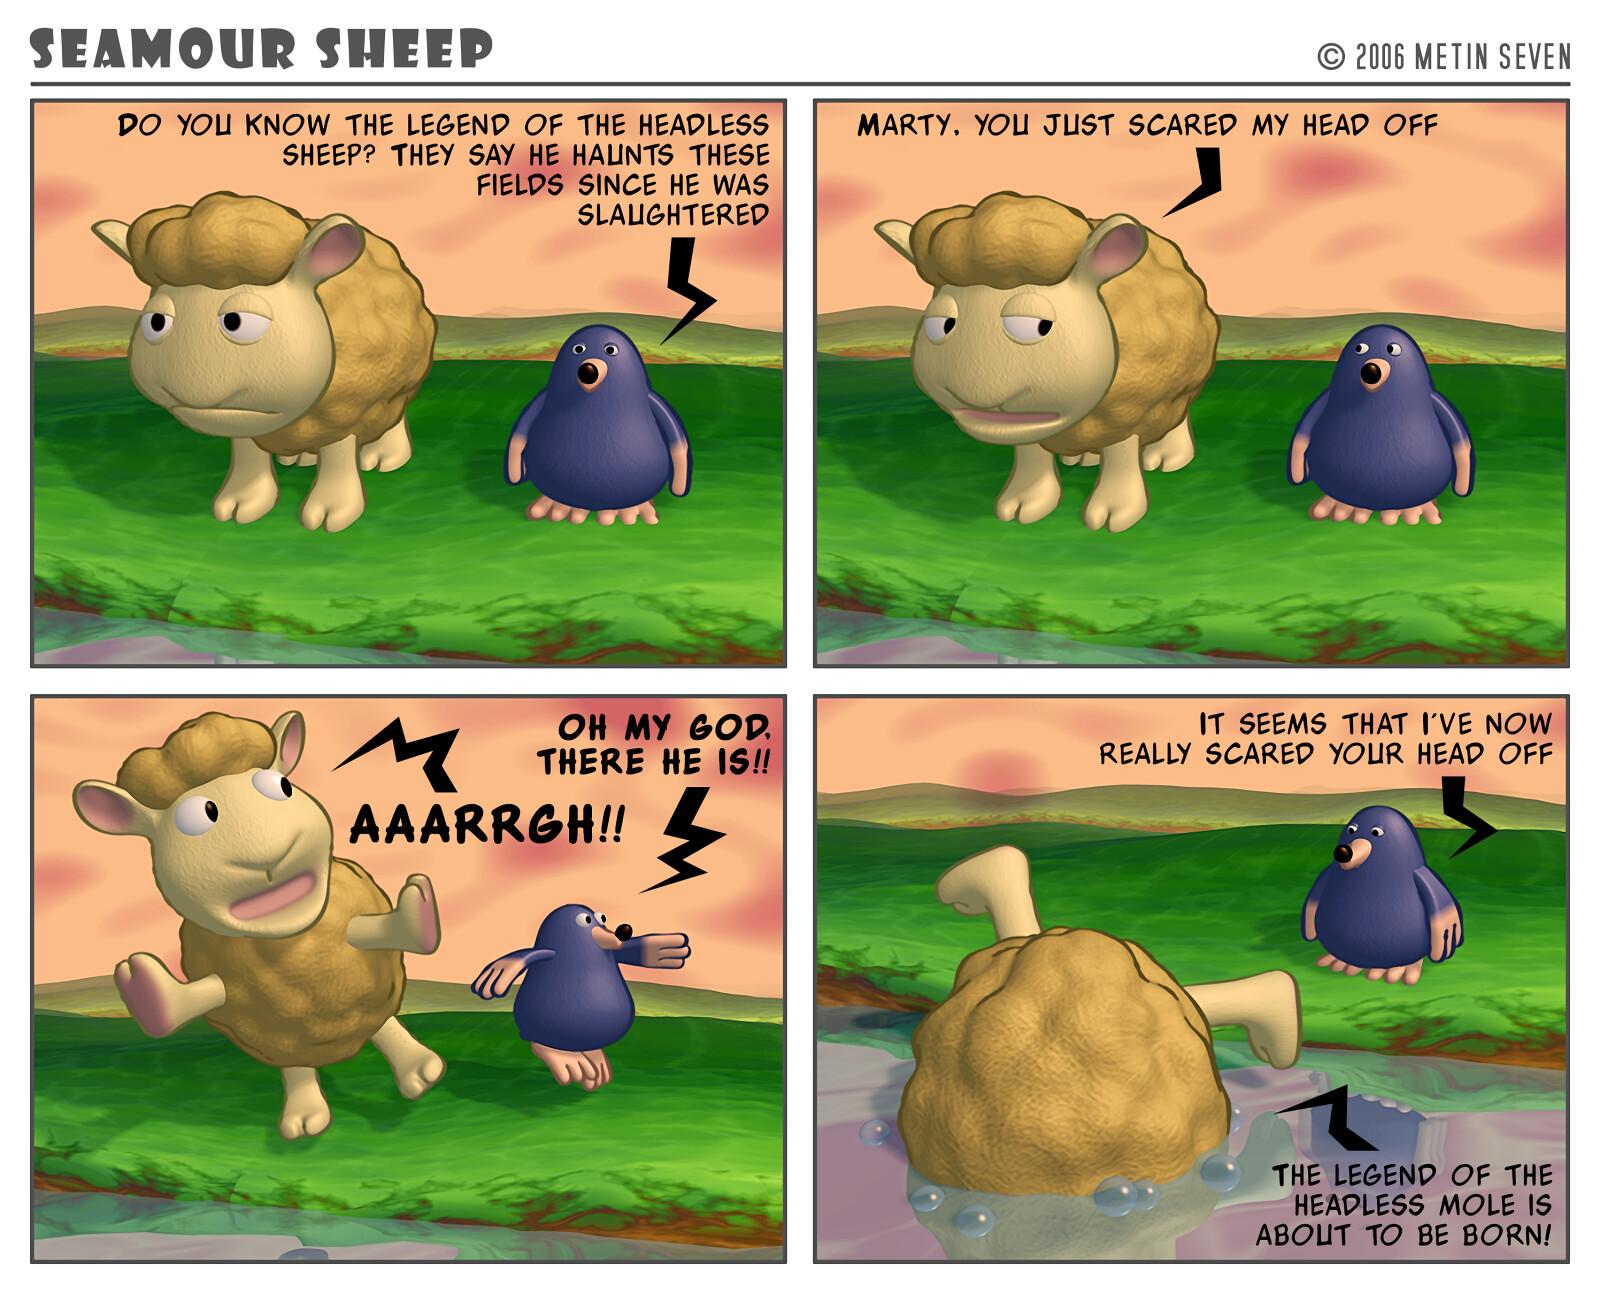 Seamour Sheep and Marty Mole comic strip episode: Legend